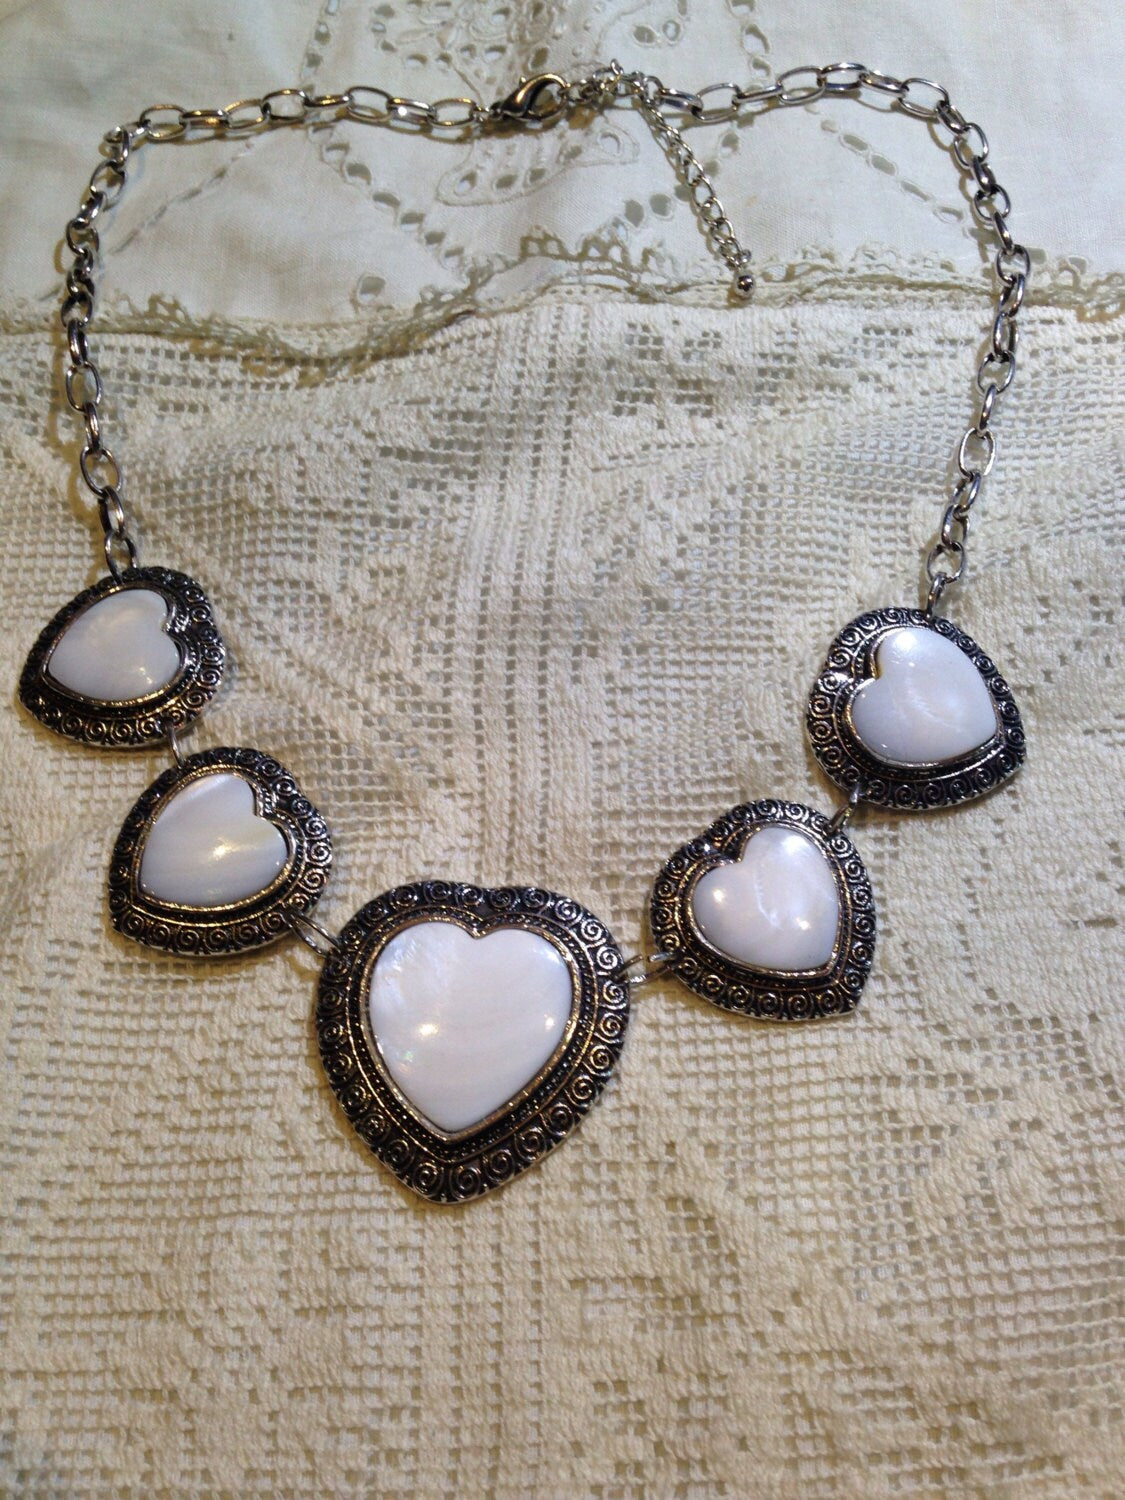 Vintage White Genuine Mother of Pearl Silver Finished Heart Necklace